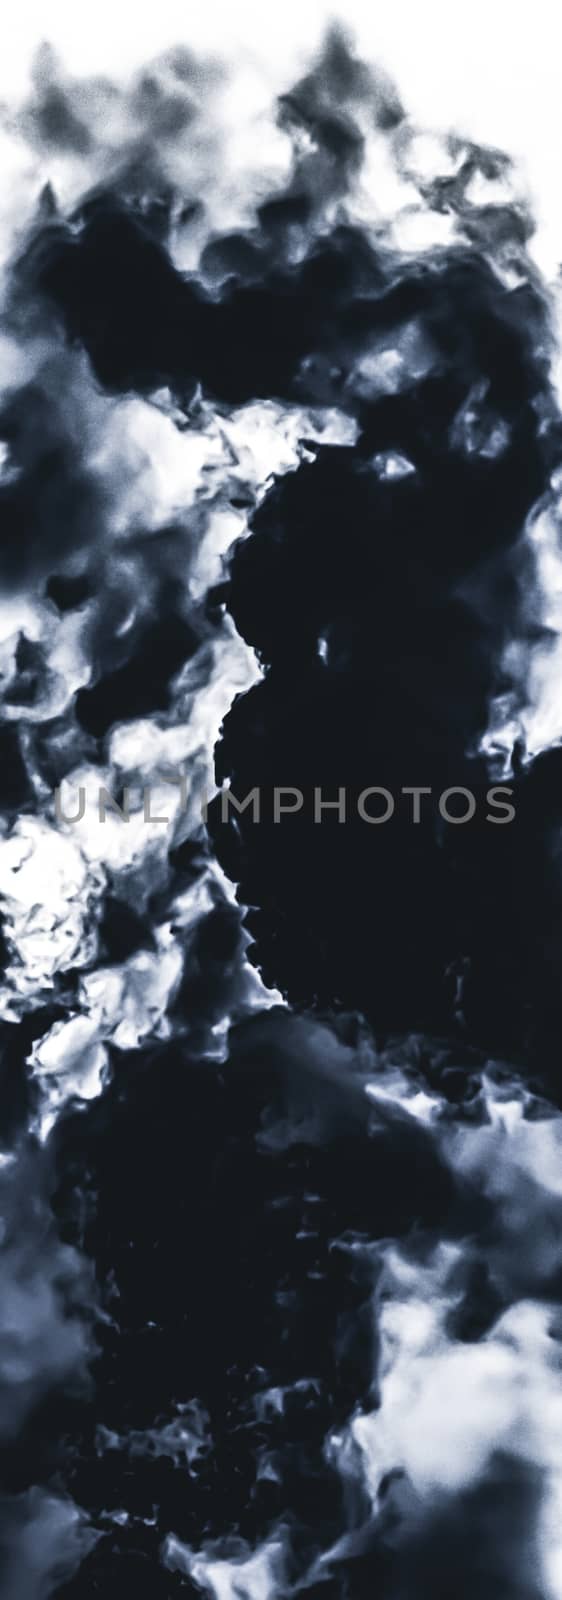 Minimalistic black cloudy background as abstract backdrop, minimal design and artistic splashes